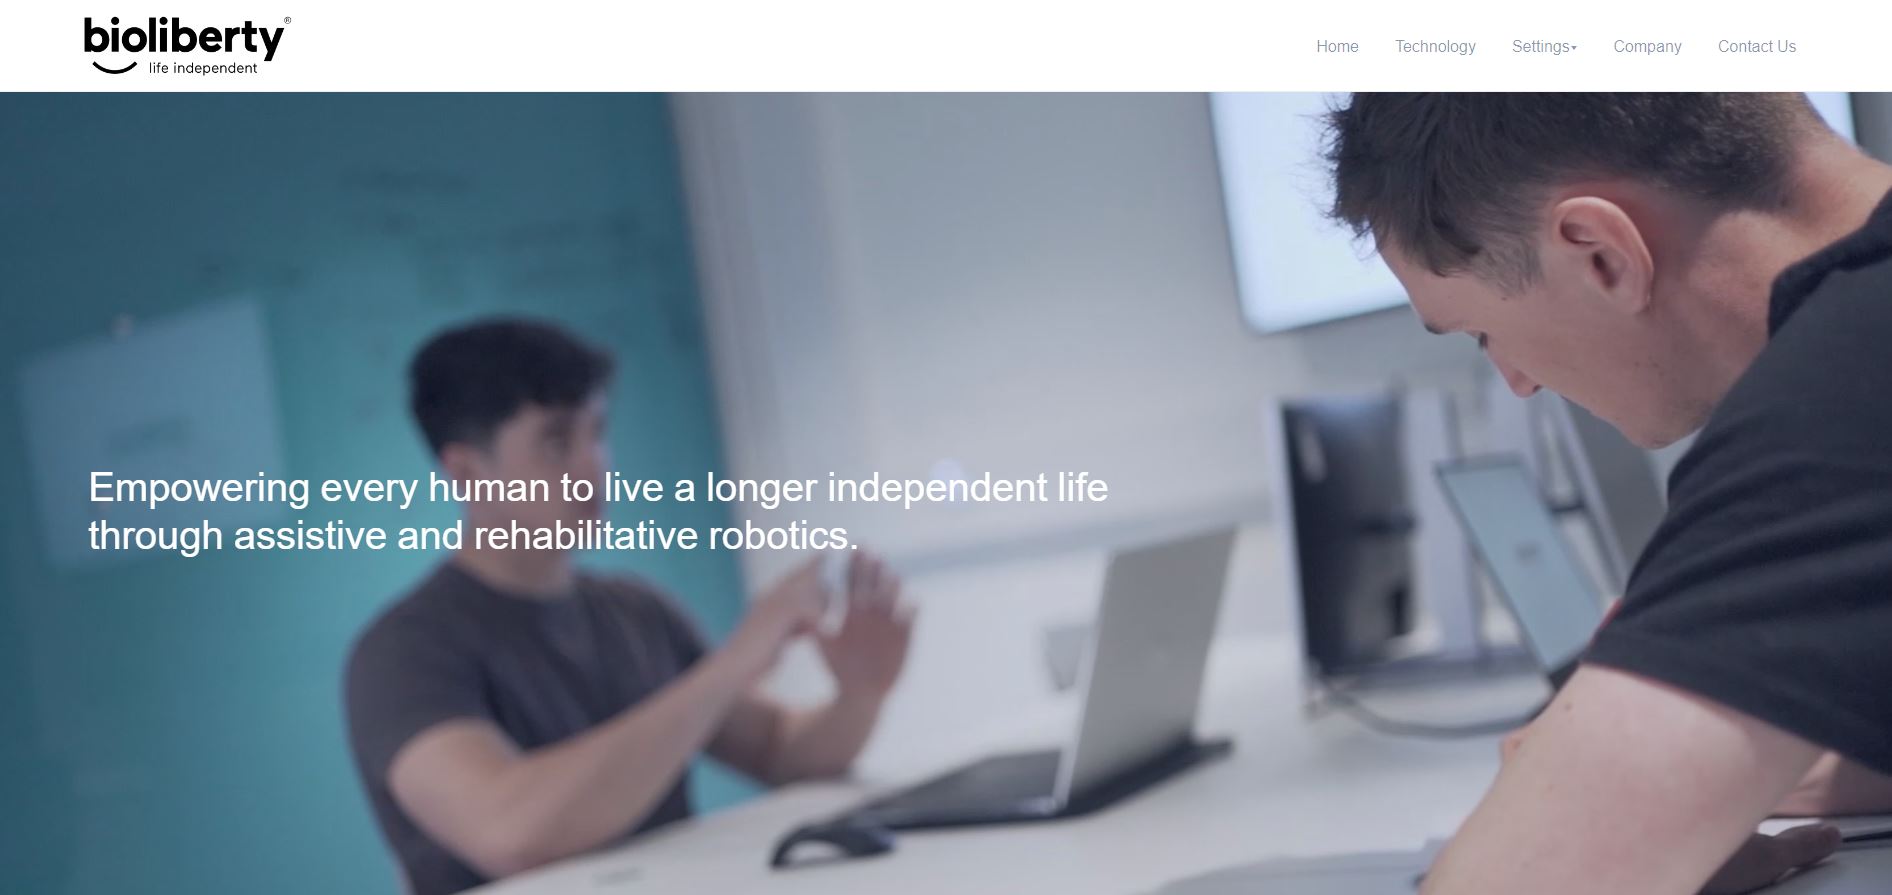 Bioliberty has recently raised an impressive $2.2M in Series A funding